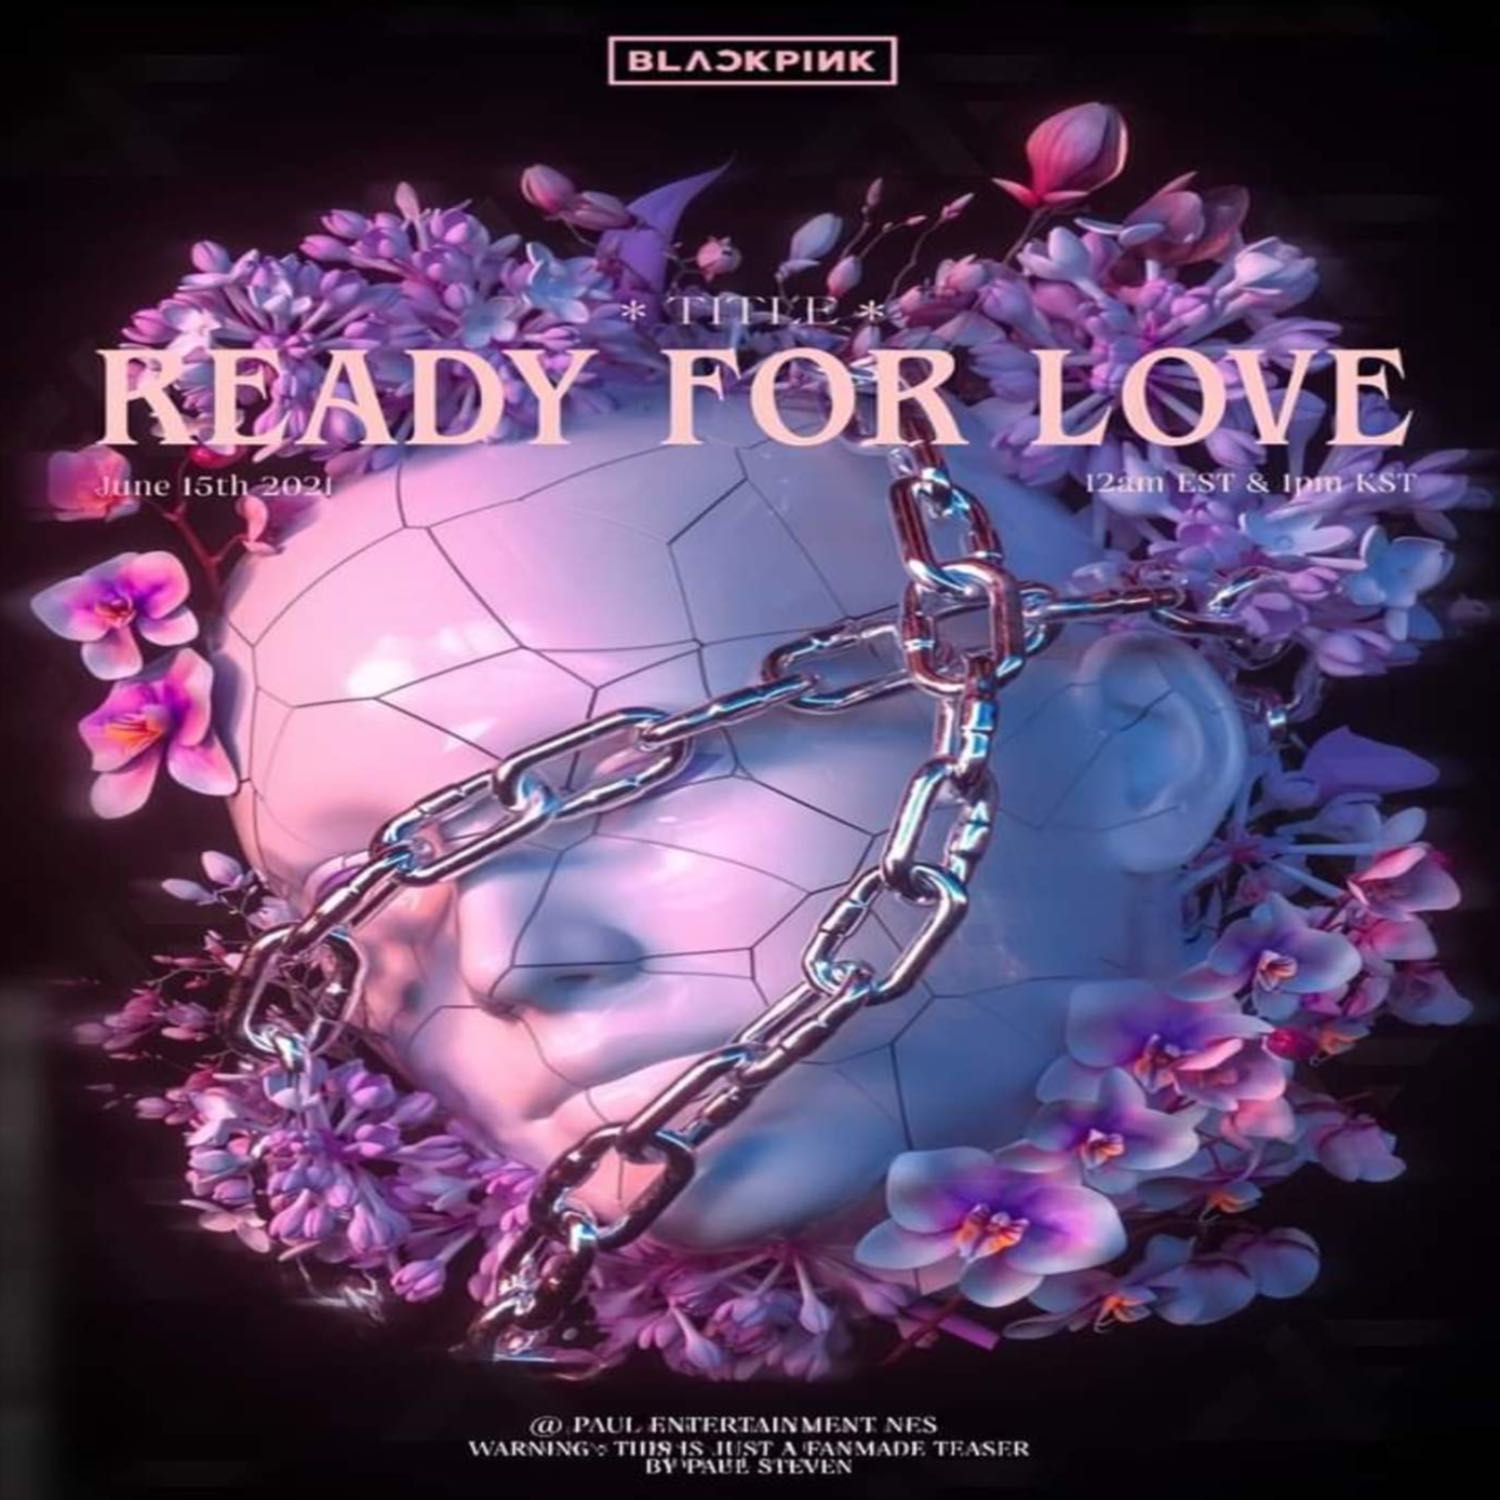 READY FOR LOVE - Blackpink